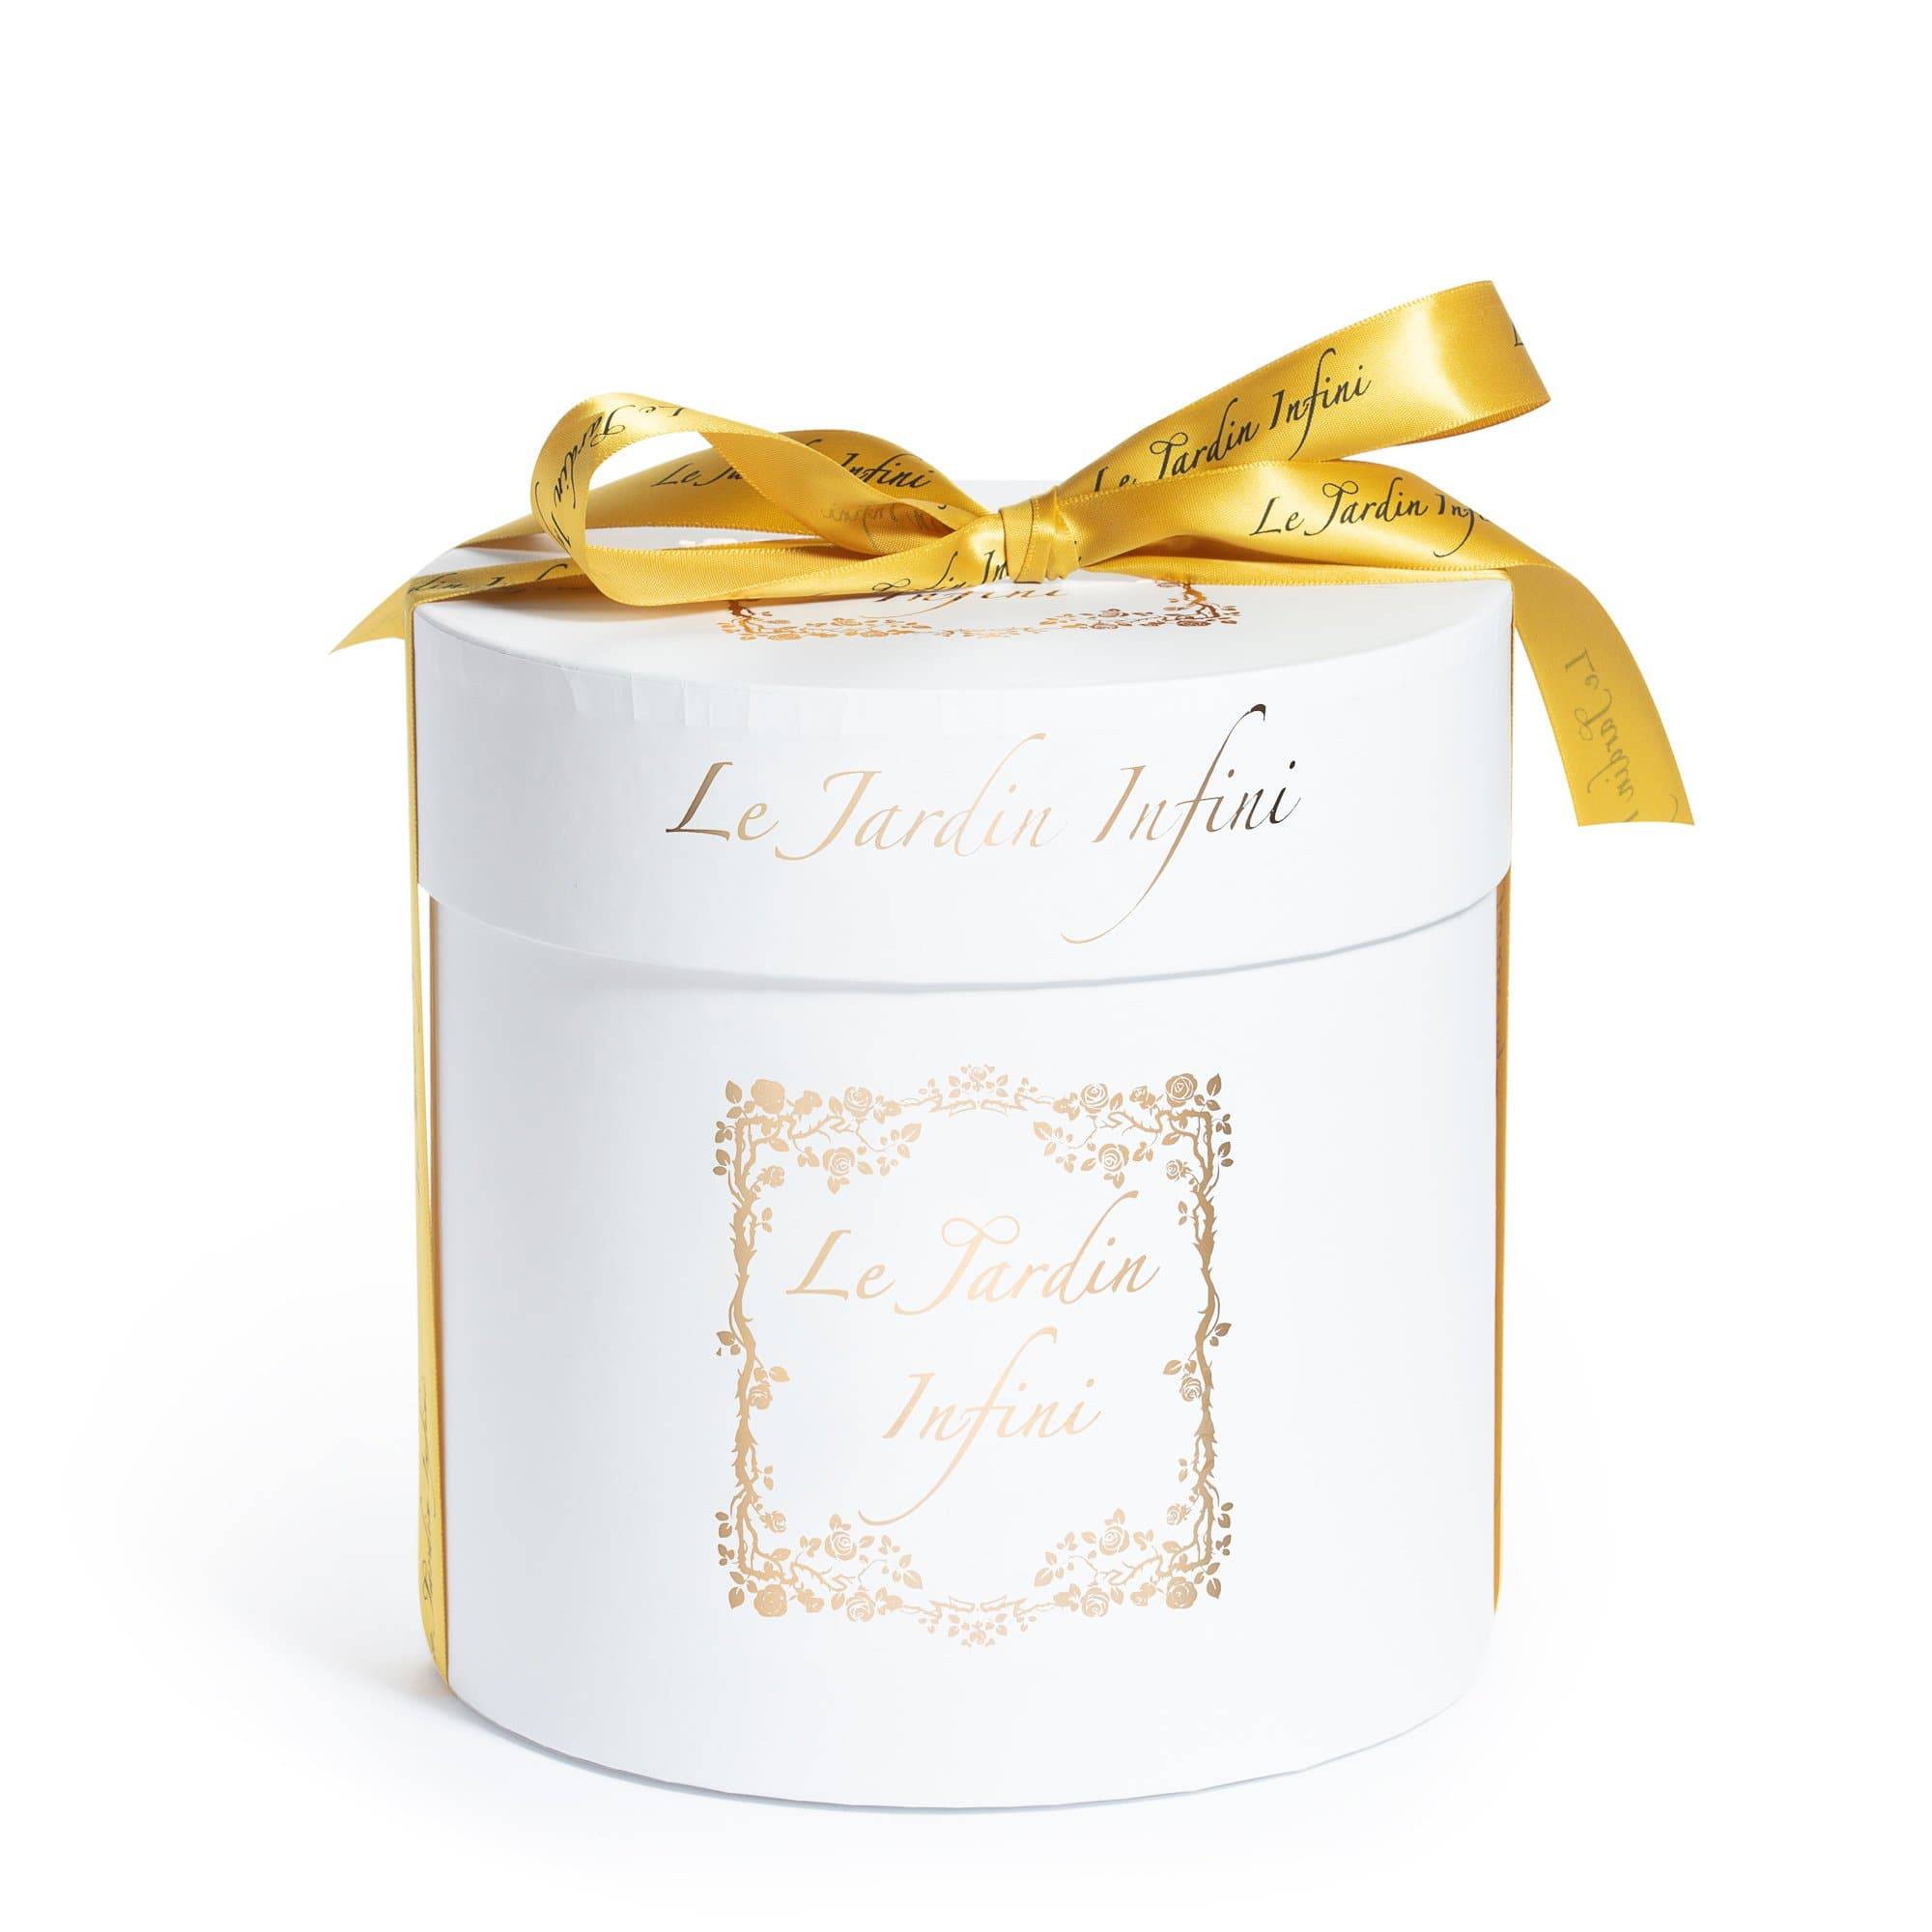 Royal Blue Preserved Roses - Medium Round White Box - Le Jardin Infini Roses in a Box